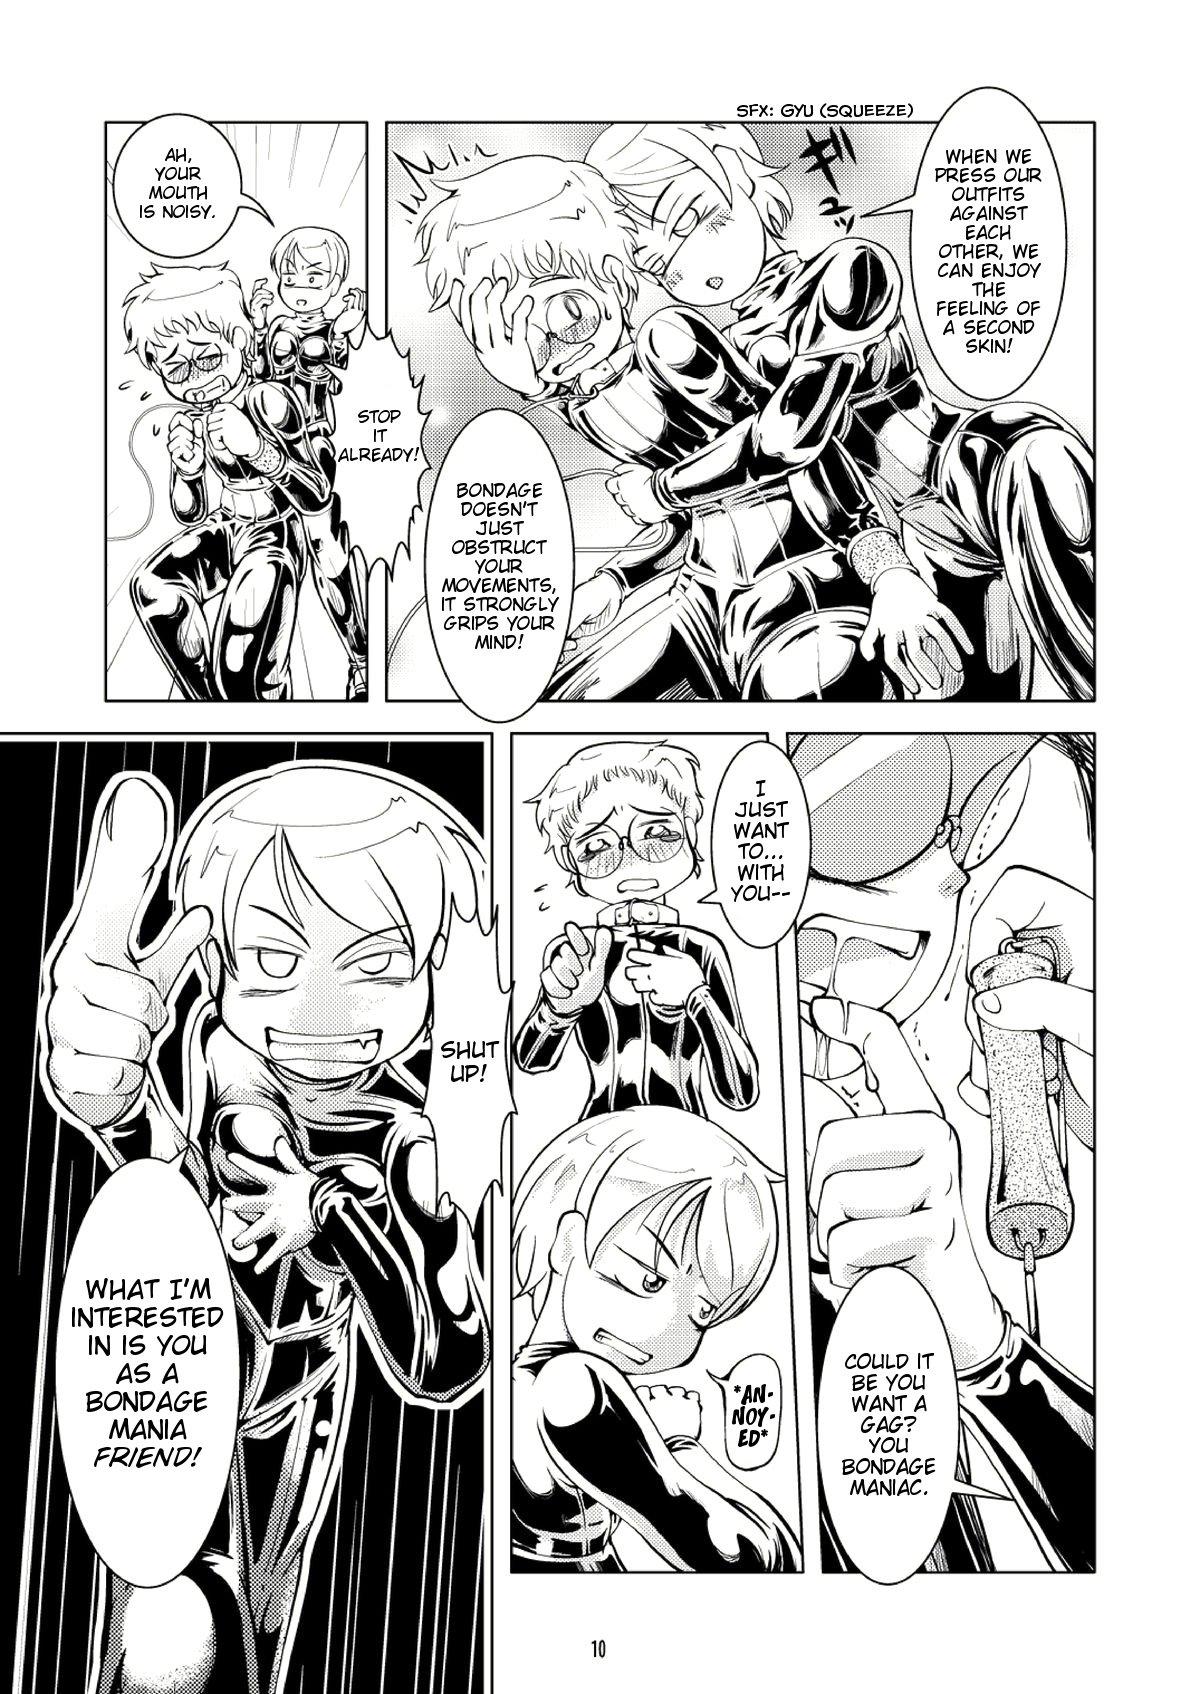 Groping Bondages and Queen's Days Adult - Page 10